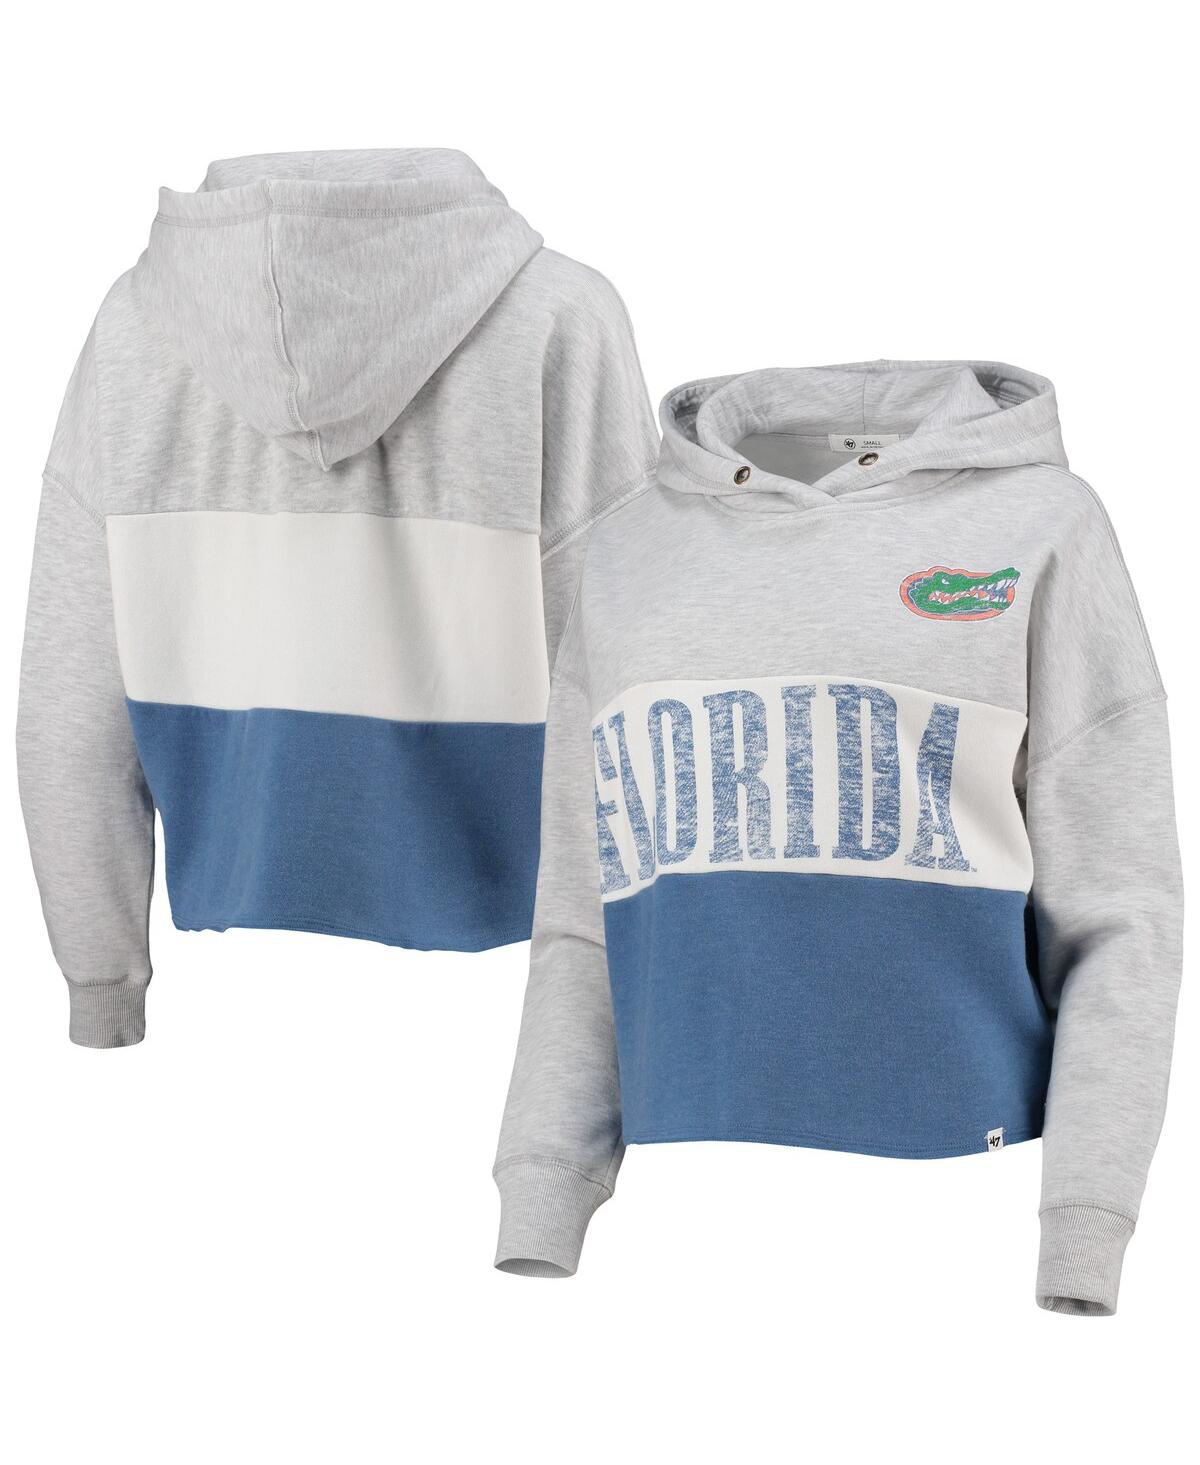 Women's '47 Heathered Gray, Heathered Royal Florida Gators Lizzy Colorblocked Cropped Pullover Hoodie - Heathered Gray, Heathered Royal